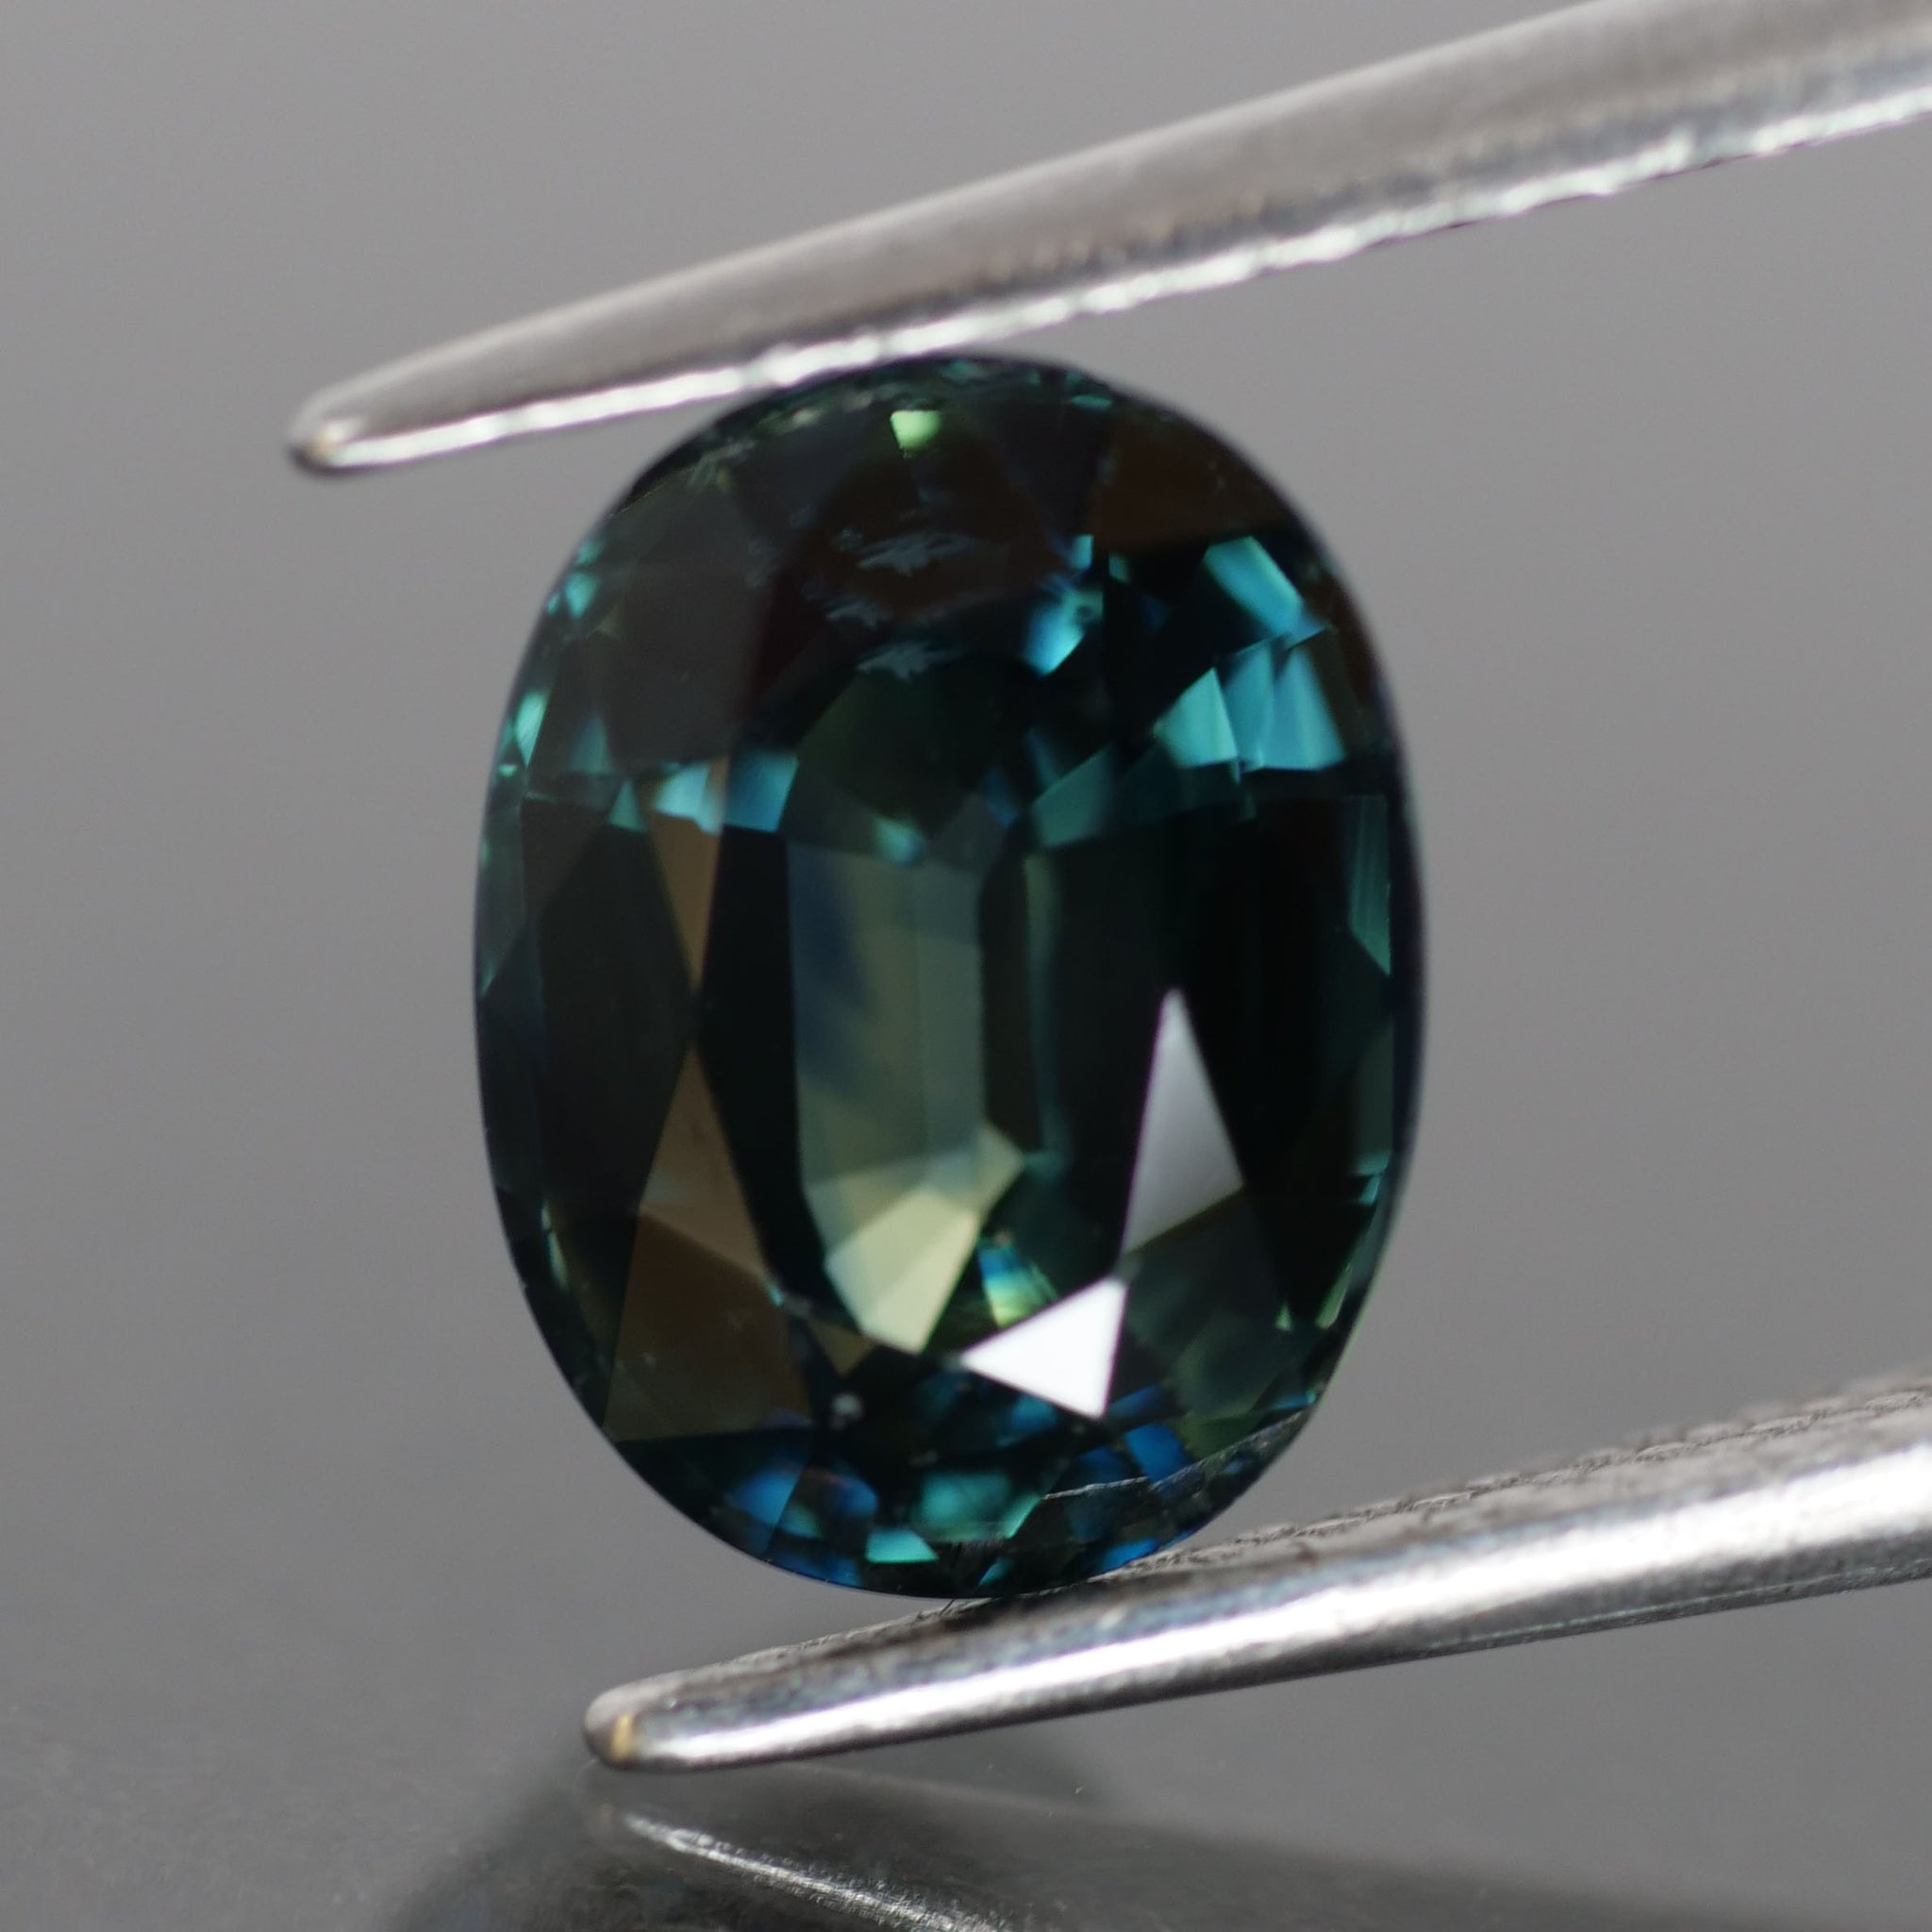 Sapphire | natural, teal color, oval cut *8.6x6.6 mm, 2.5ct - Eden Garden Jewelry™